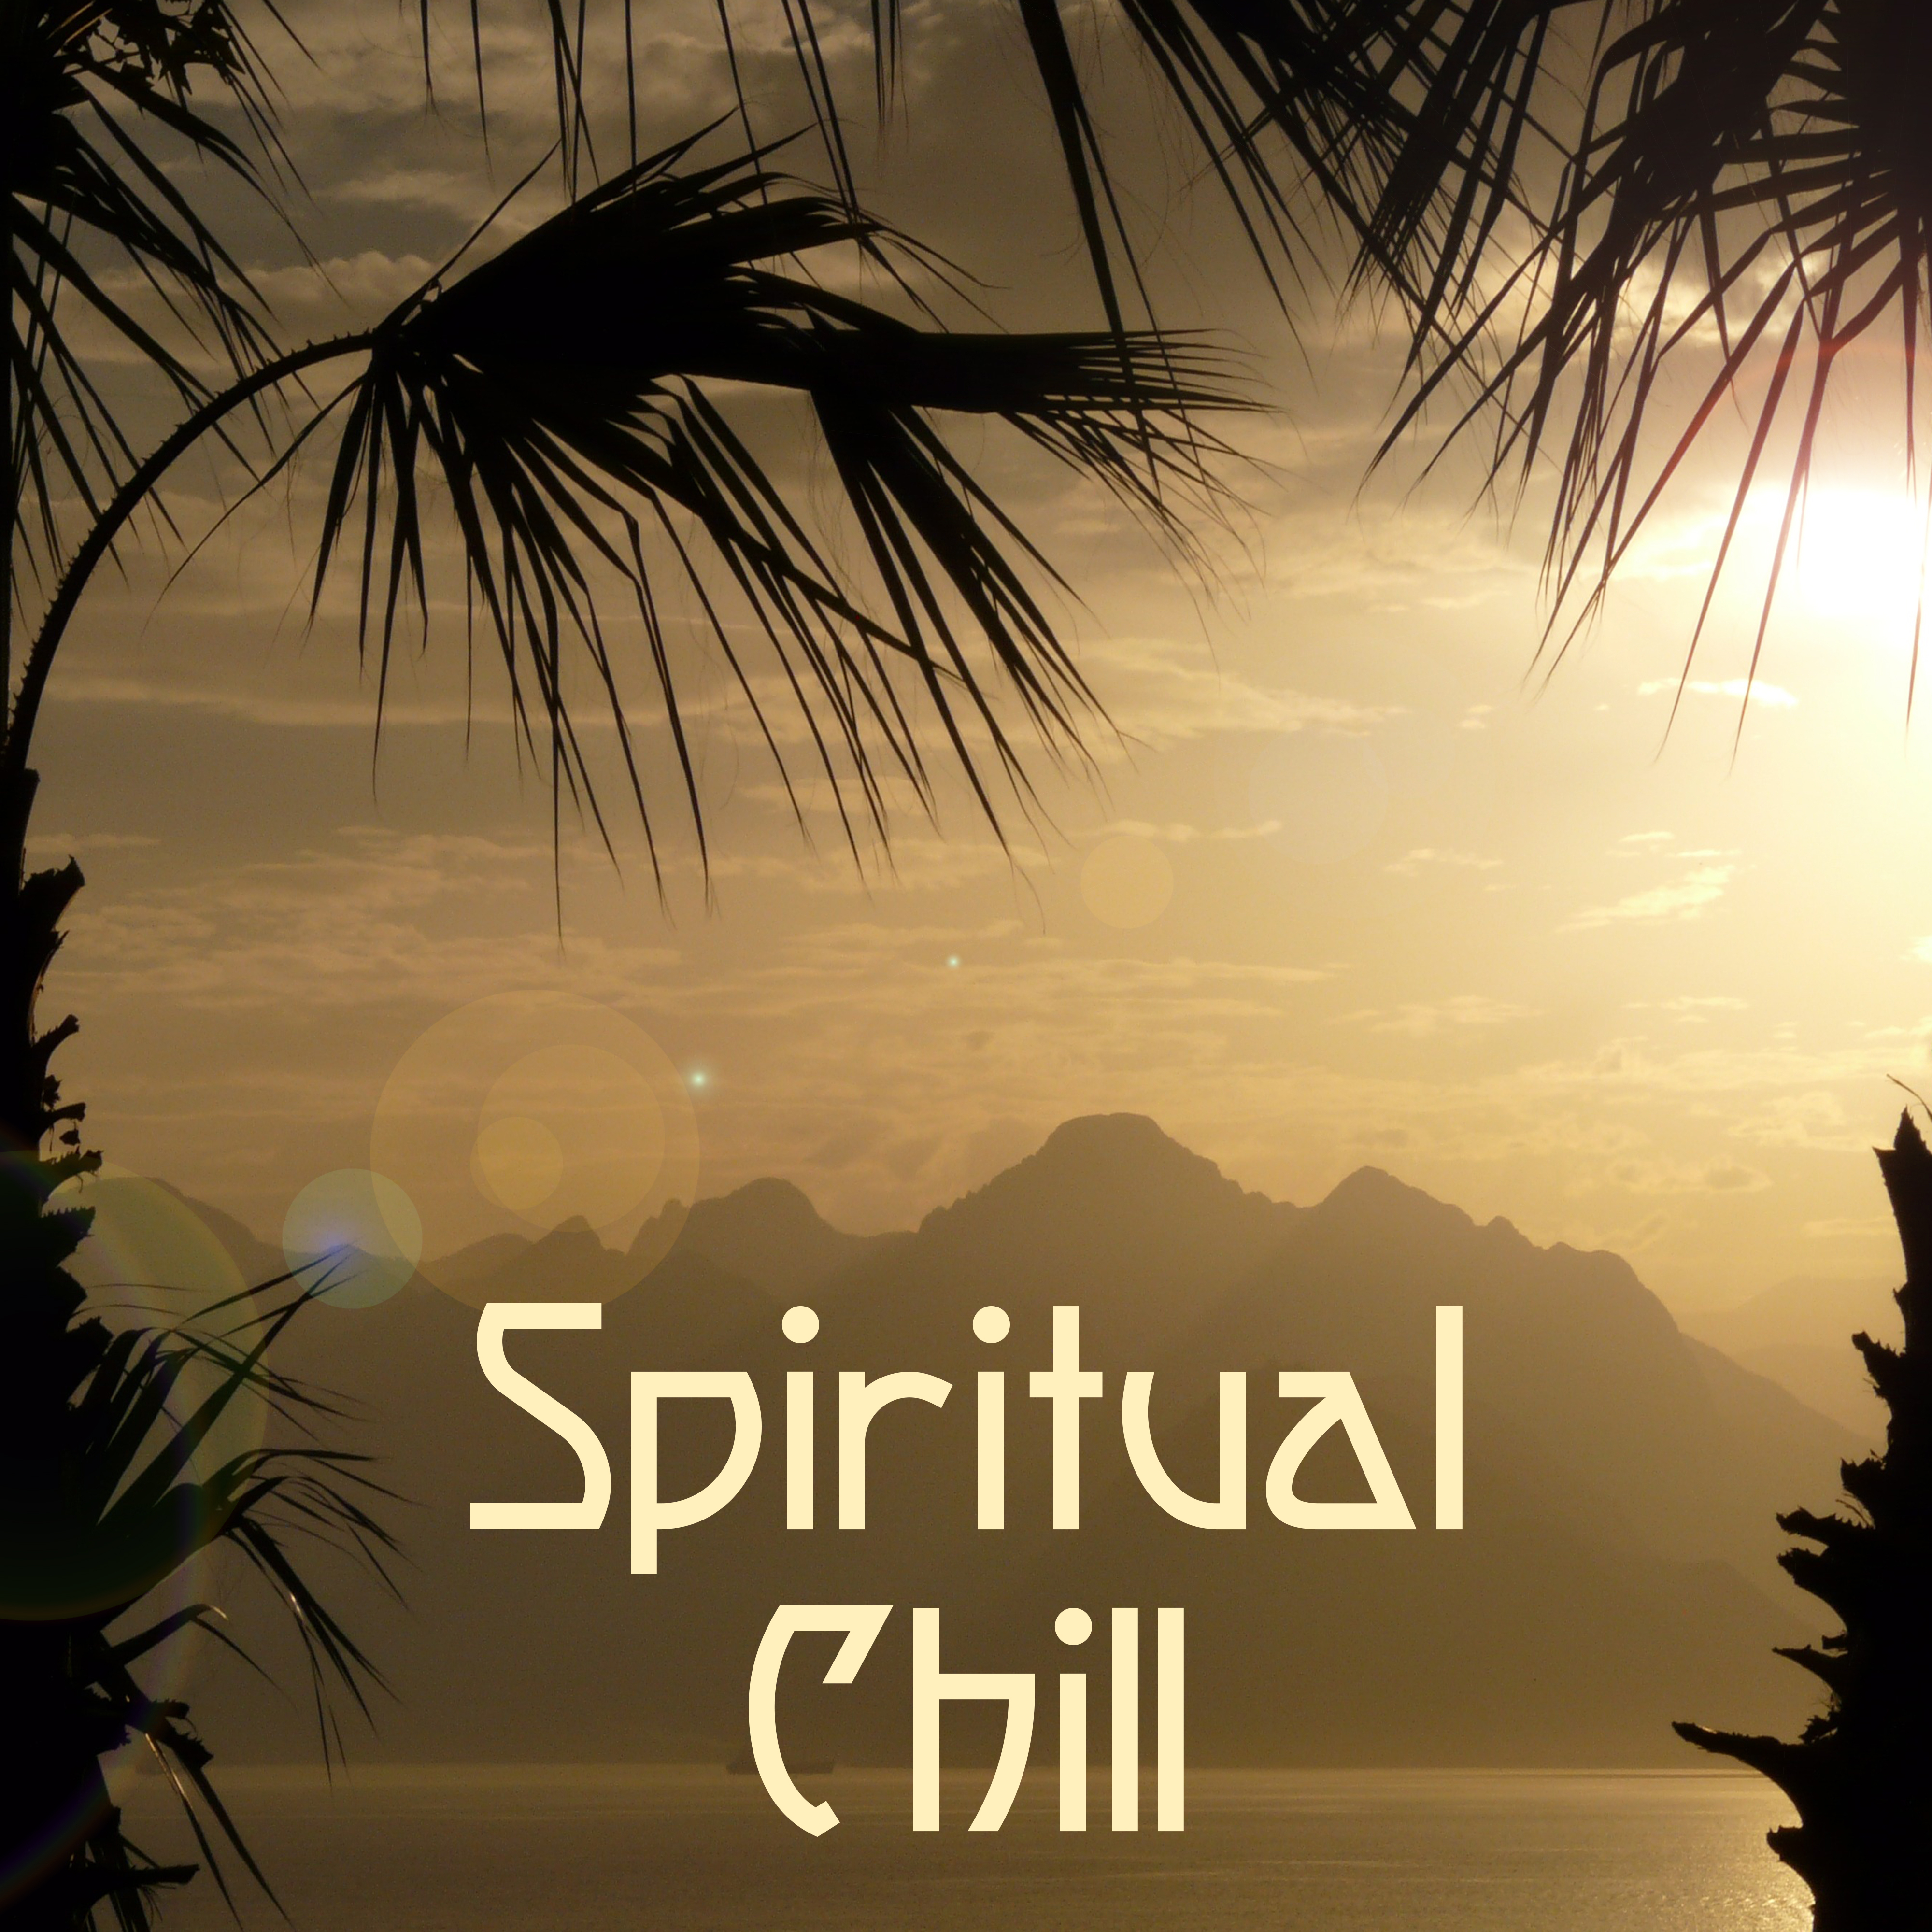 Spiritual Chill – Peaceful Music, Spa Chill Out, Deep Relaxation, Therapy Sounds, Deep Relief, Just Relax, Stress Free